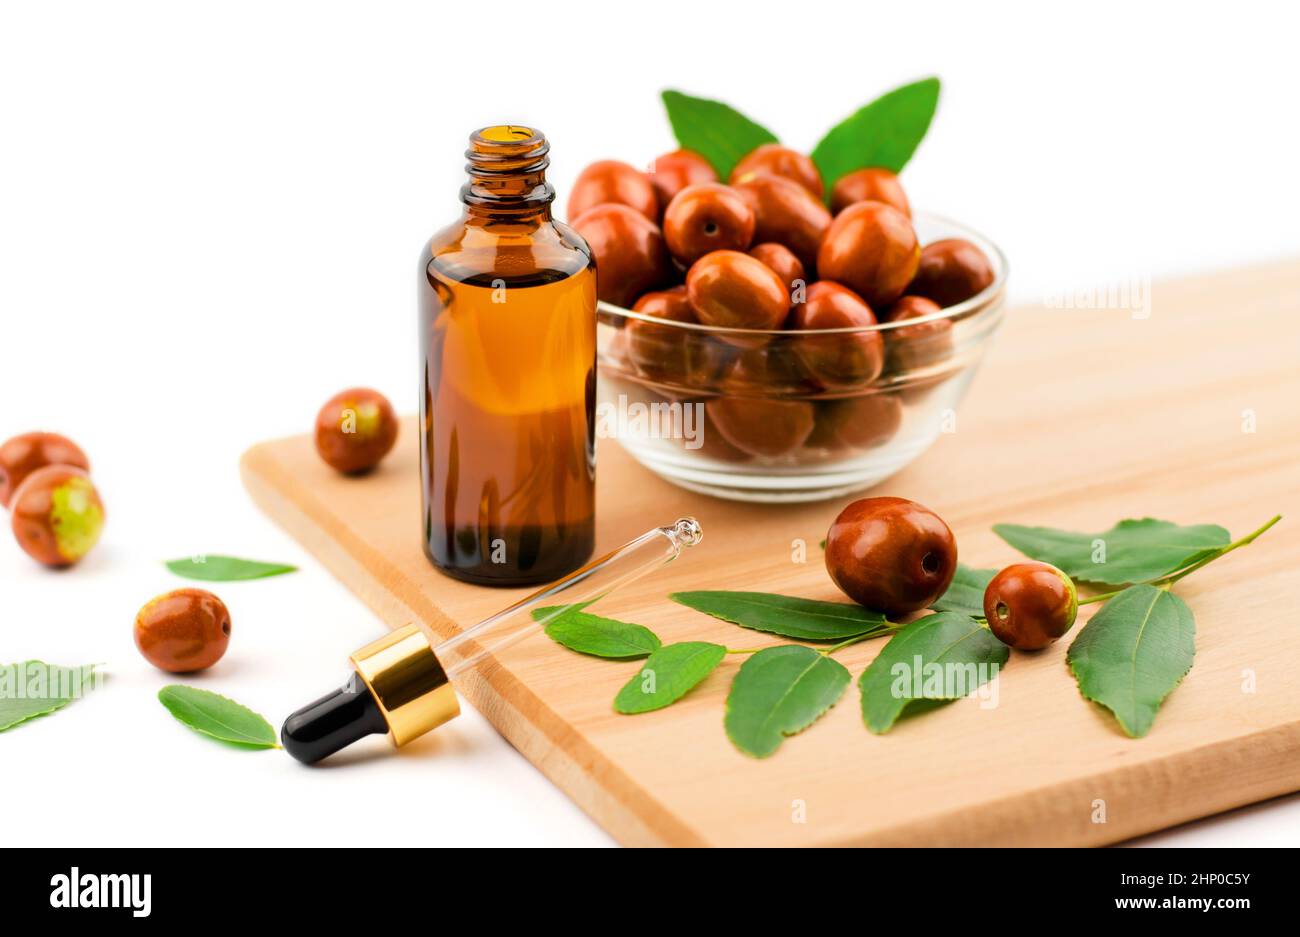 Jojoba oil in a bottle with a dropper on a wooden table with ripe jojoba fruits. Chinese date oil and fruit Stock Photo